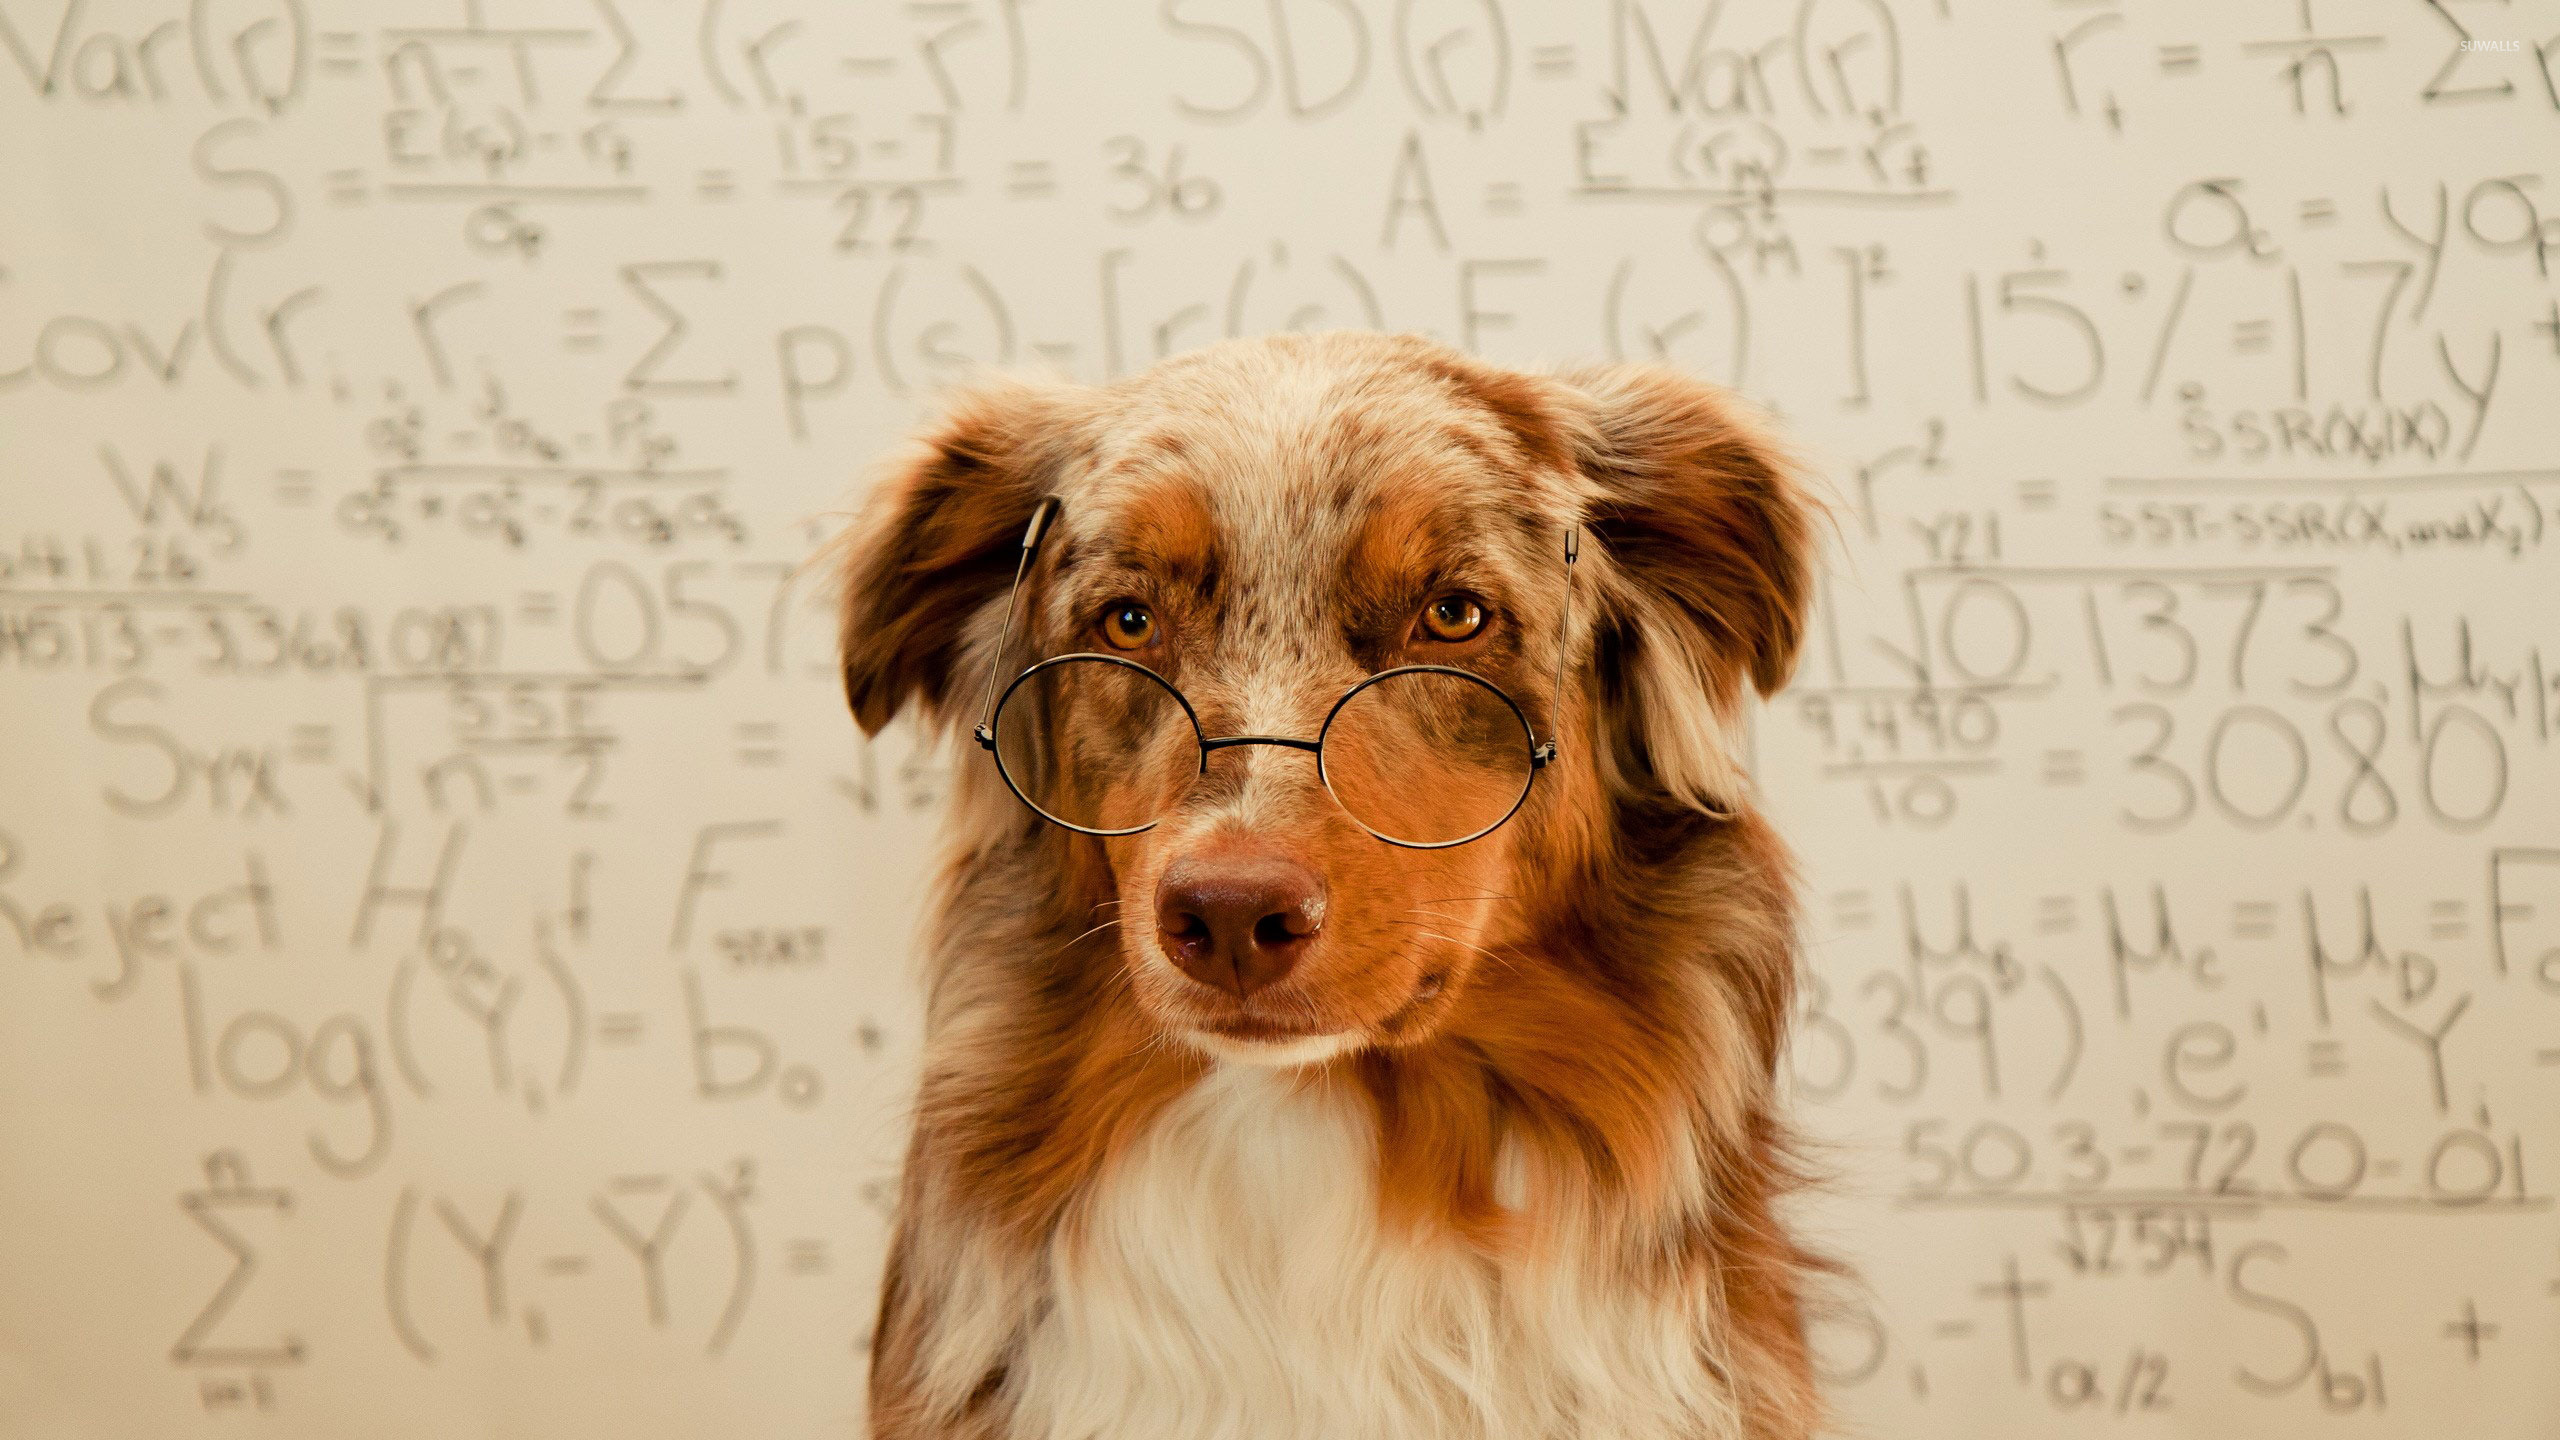 Dog With Glasses Wallpaper Animal